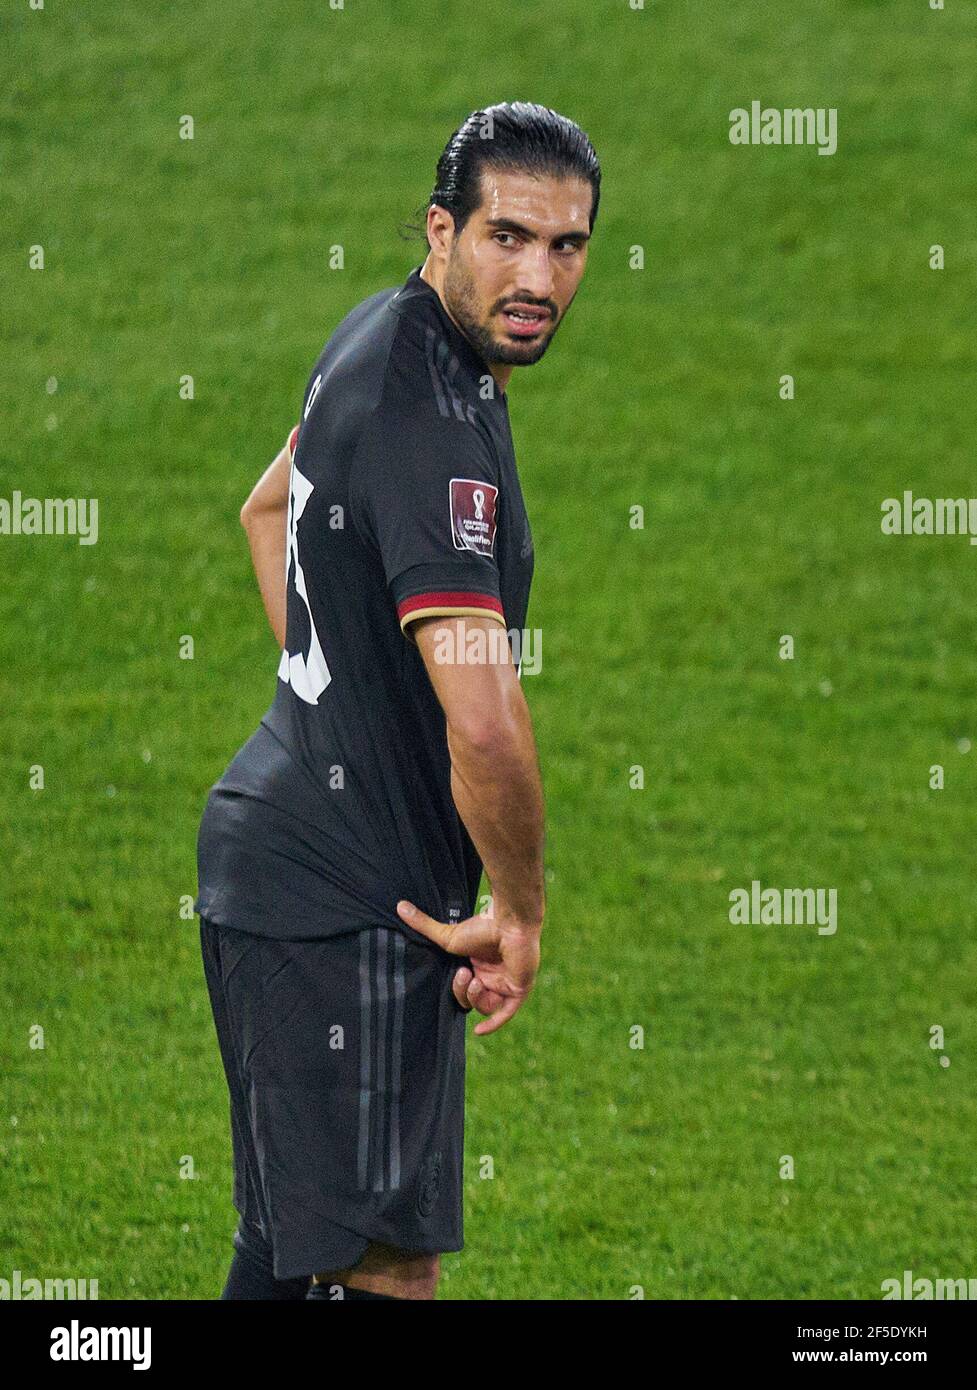 Emre CAN, DFB 23  half-size, portrait, one person, single, Aktion, Einzelbild, angeschnittenes Einzelmotiv, Halbfigur, halbe Figur,  in the match GERMANY - ICELAND 3-0 Deutschland - ISLAND 3-0 Qualification for World Championships, WM Quali, Season 2020/2021,  March 25, 2021  in Duisburg, Germany.  © Peter Schatz / Alamy Live News  Important: DFB regulations prohibit any use of photographs as image sequences and/or quasi-video. Stock Photo